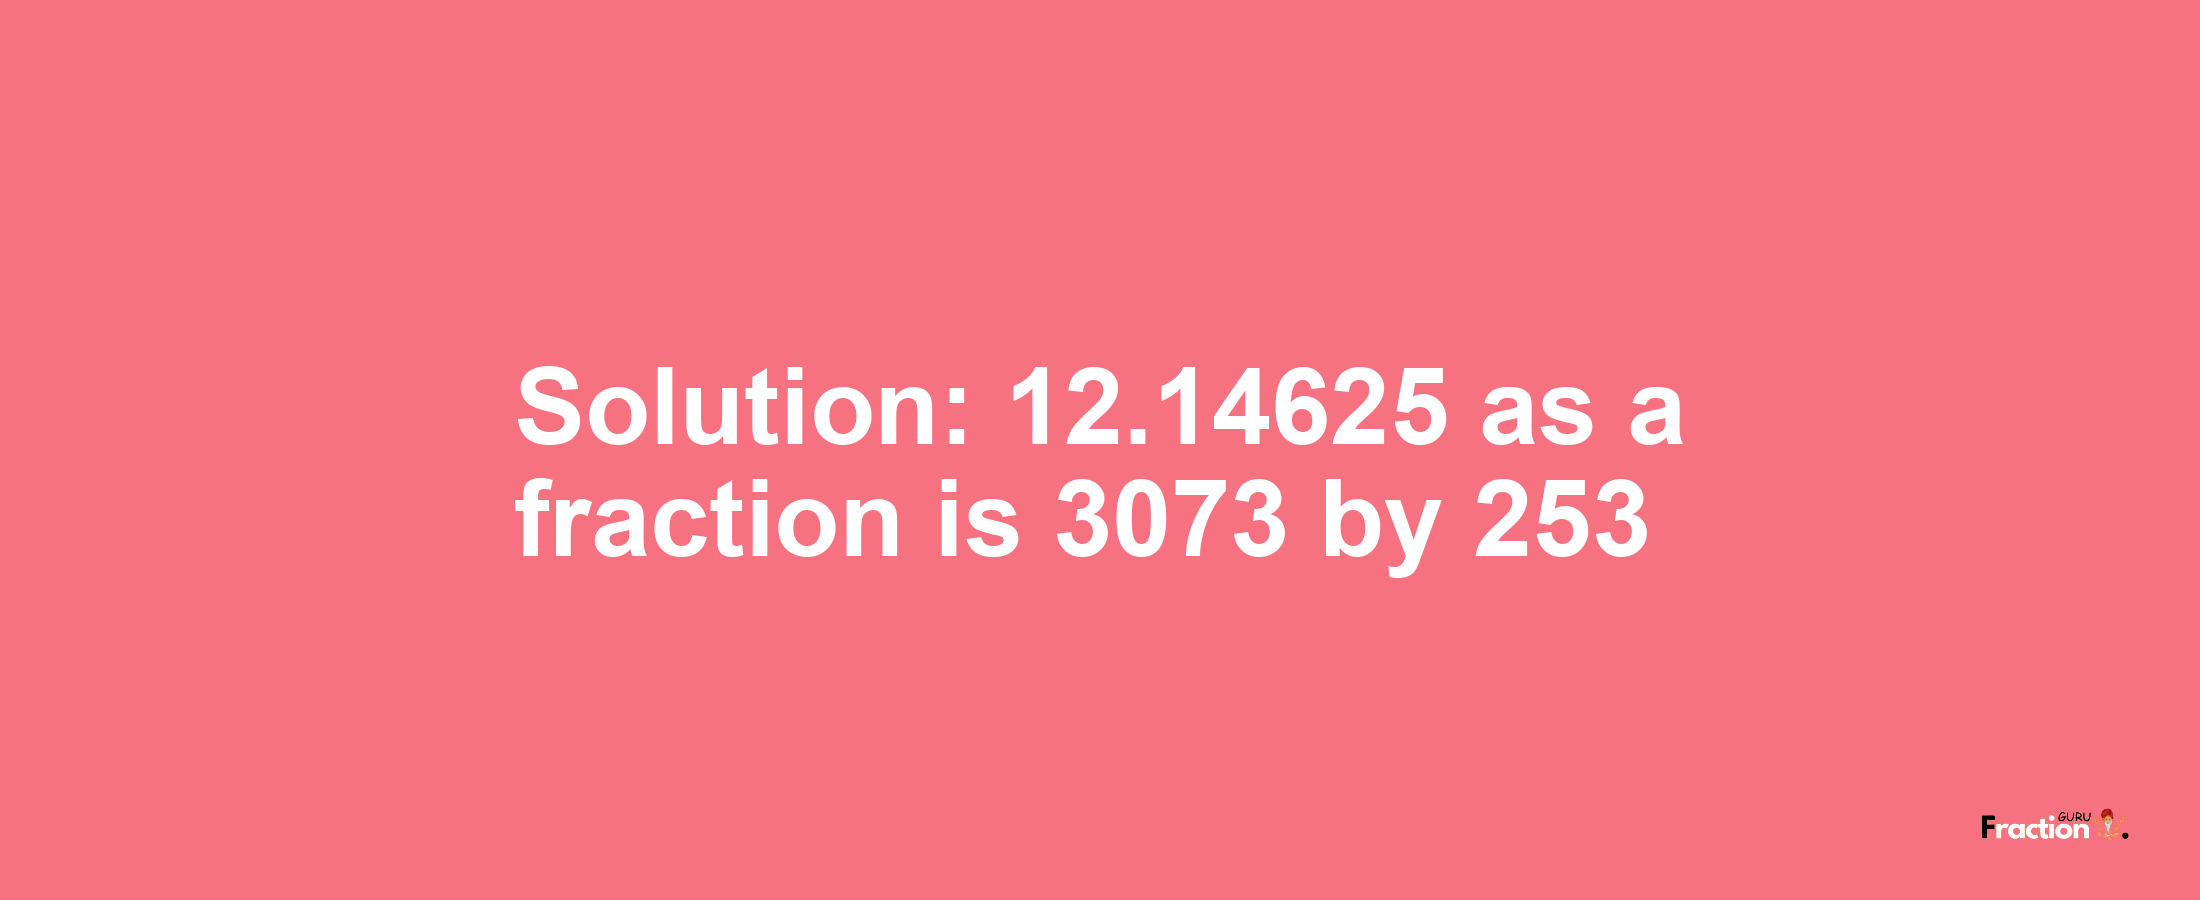 Solution:12.14625 as a fraction is 3073/253